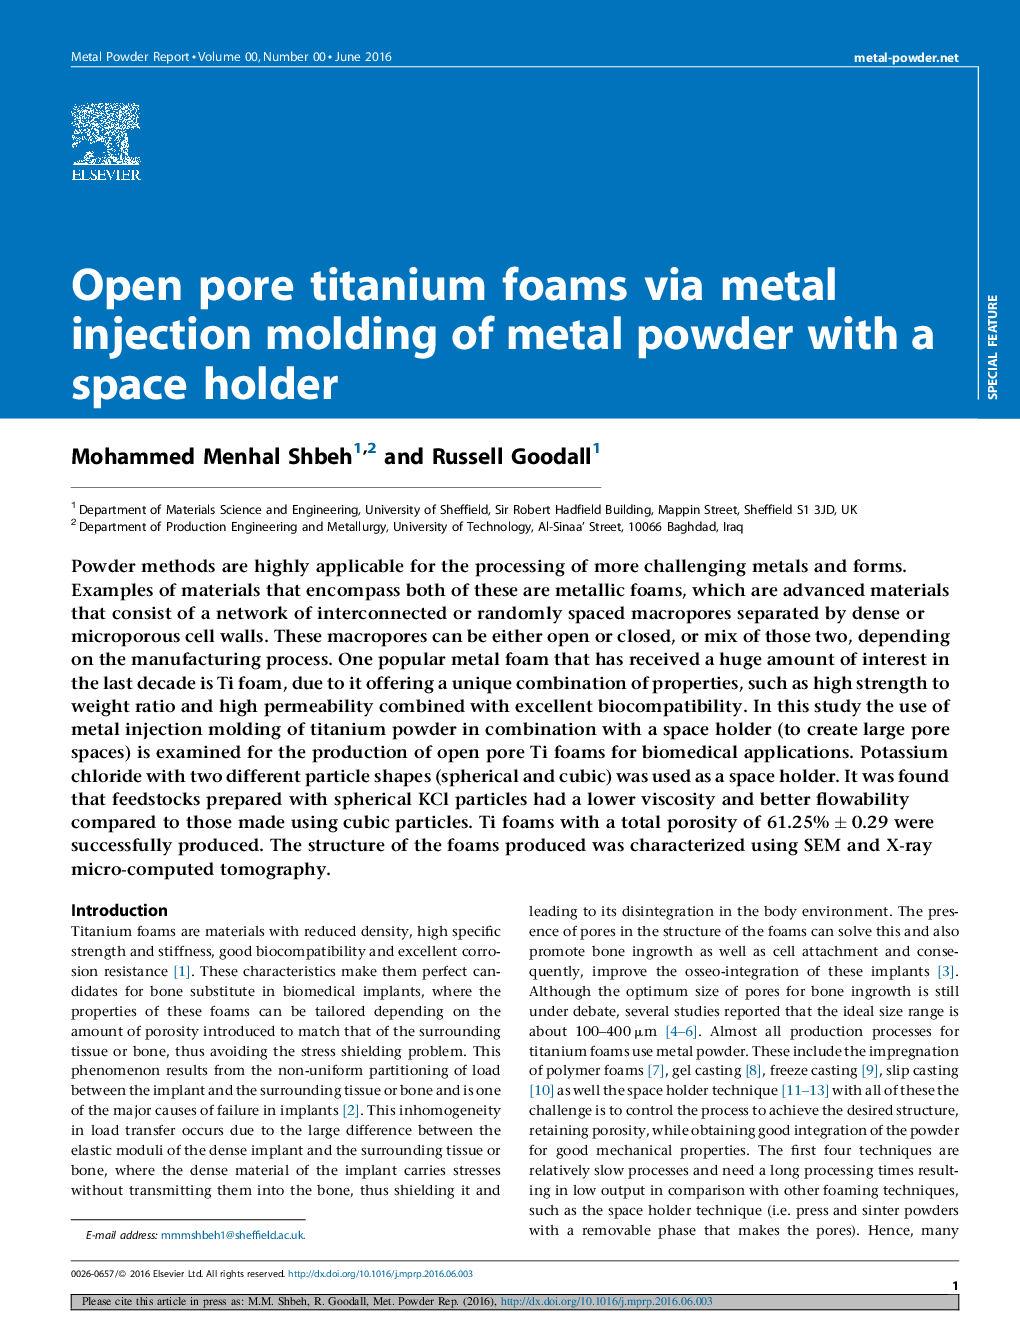 Open pore titanium foams via metal injection molding of metal powder with a space holder